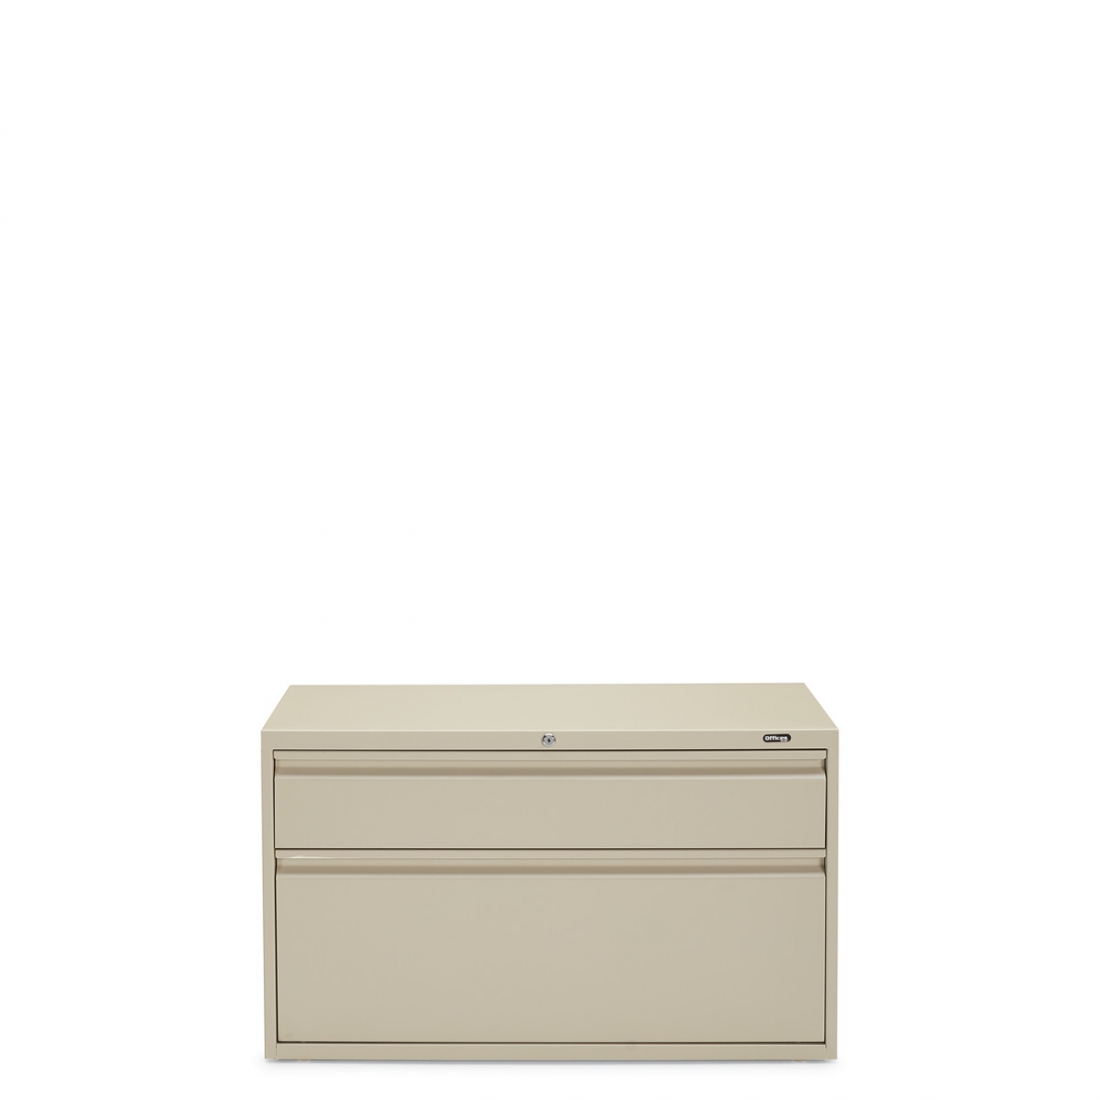 1 ½ High 30"W Lateral Cabinet